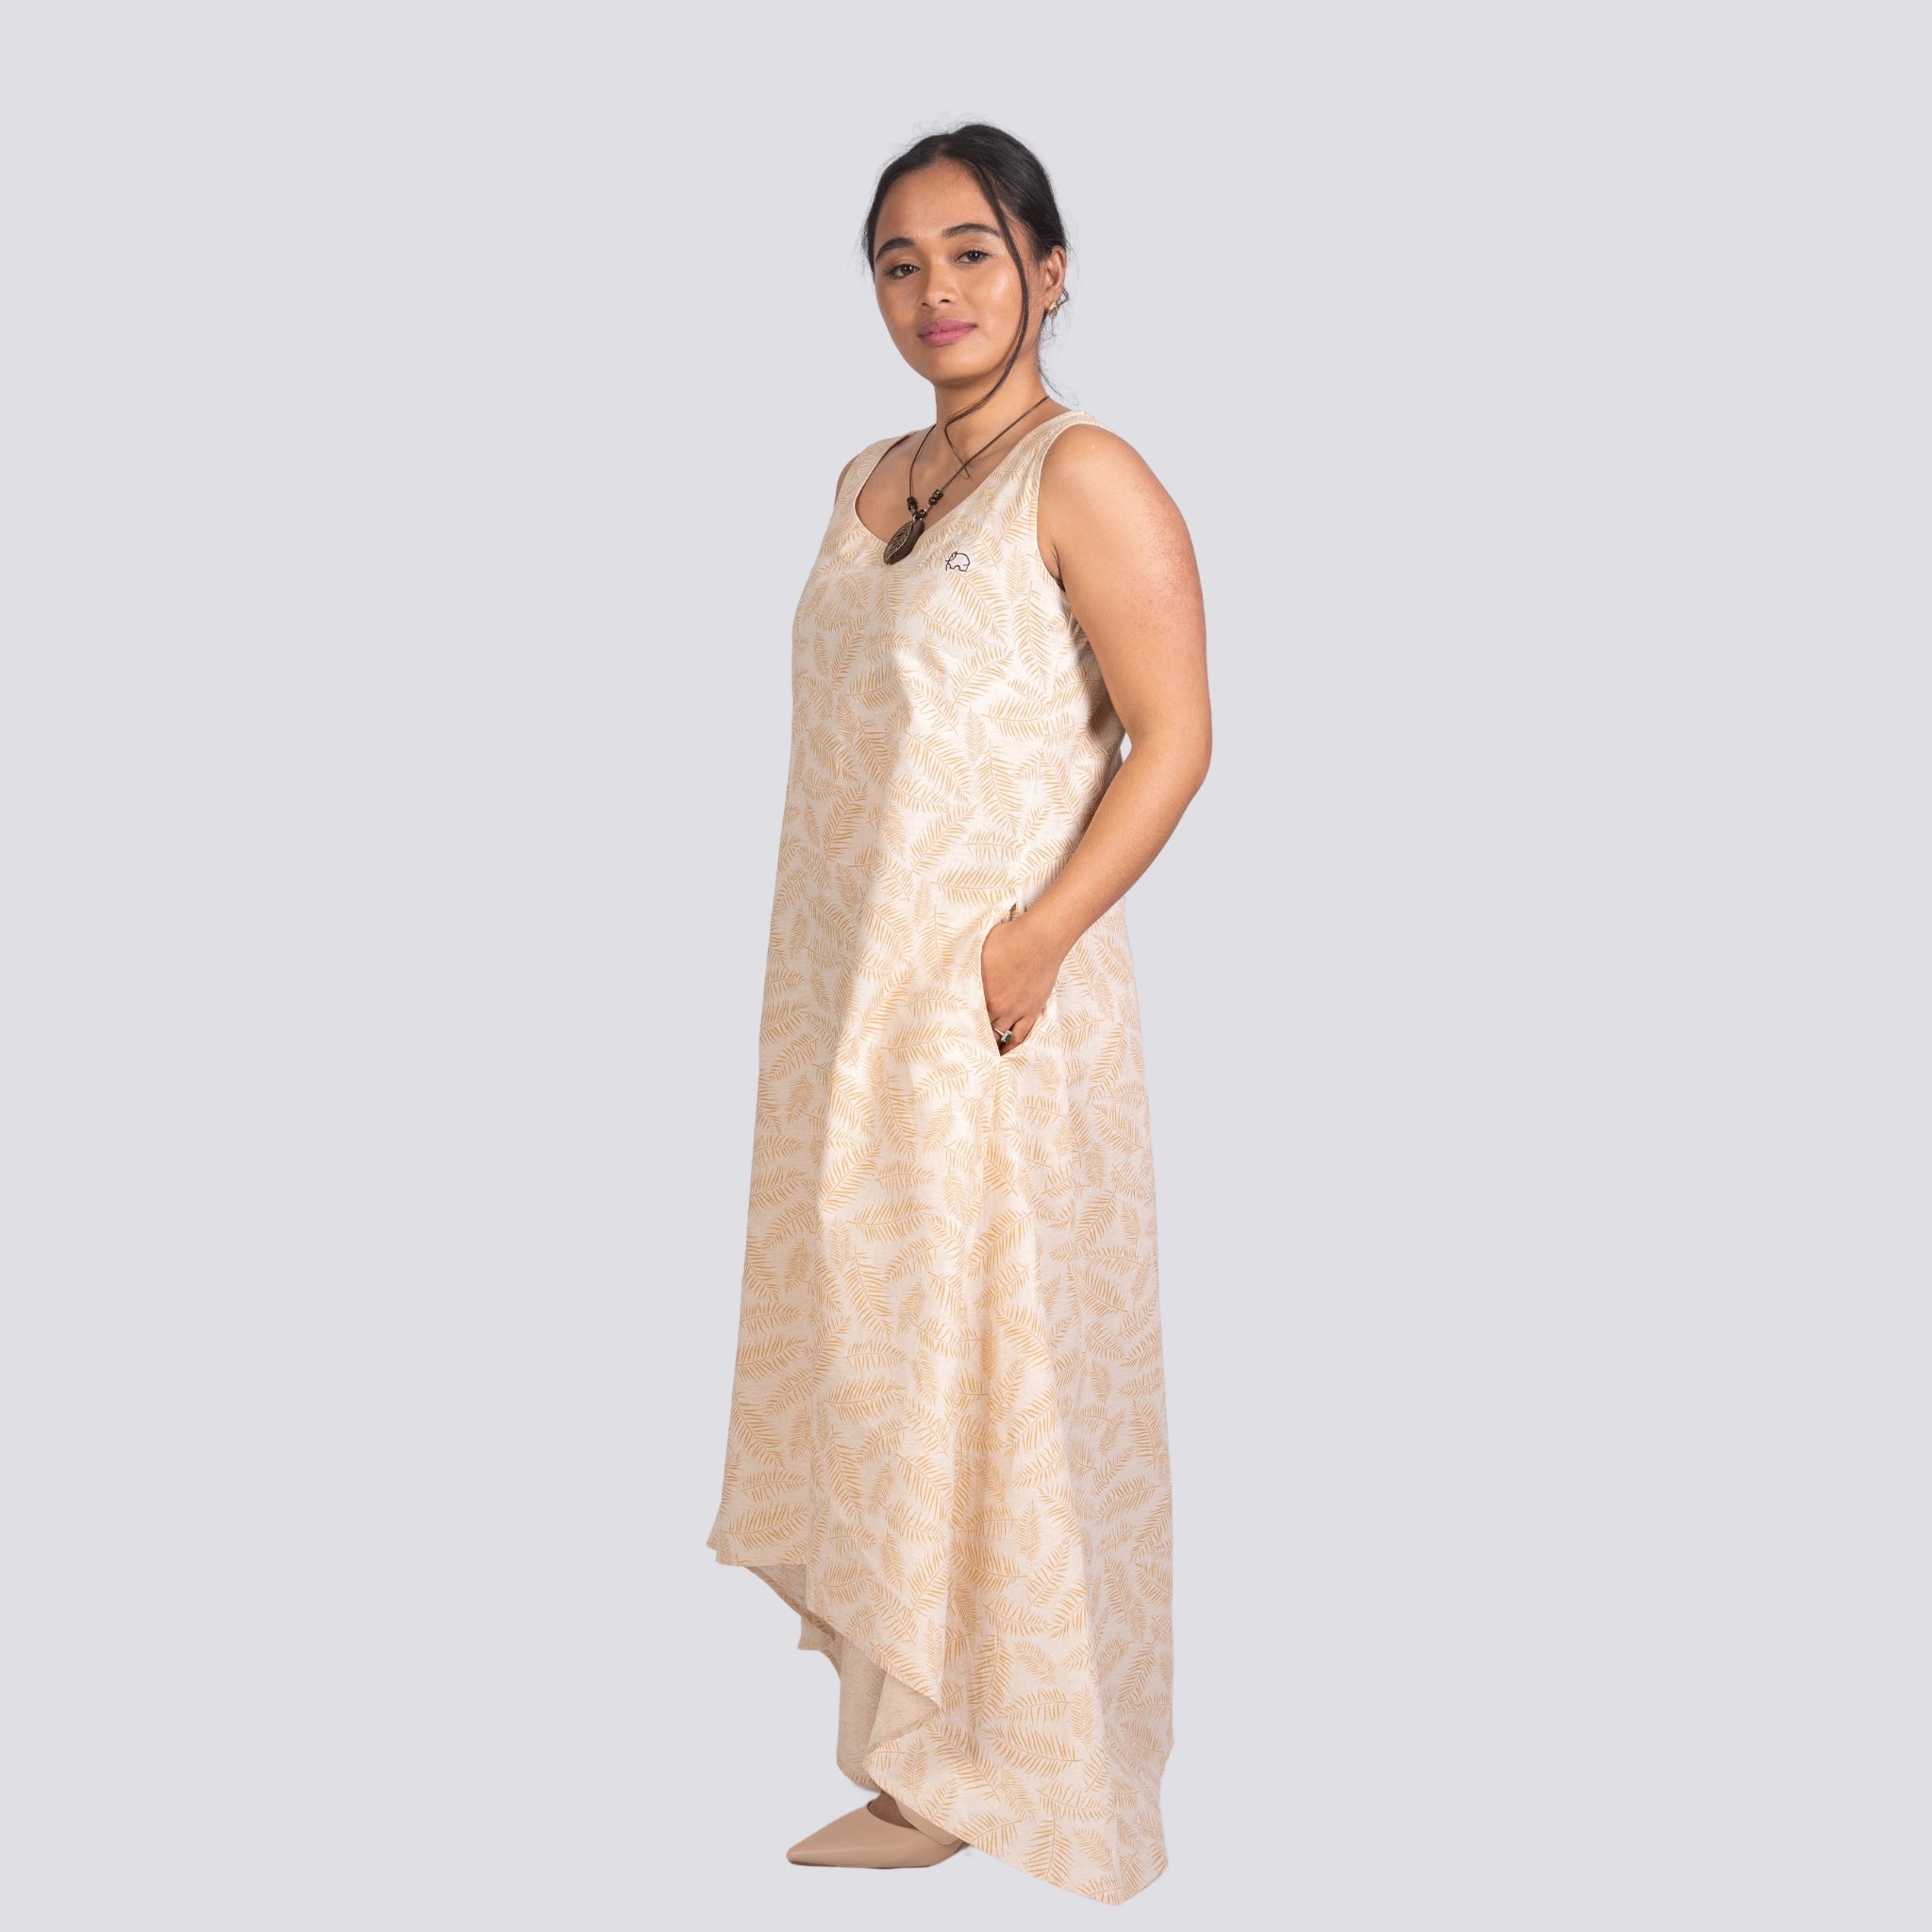 A woman in a sleeveless U-neck design Karee Mystic Serenity High Low Linen Cotton Midi Dress stands confidently, looking towards the camera, against a light gray background.